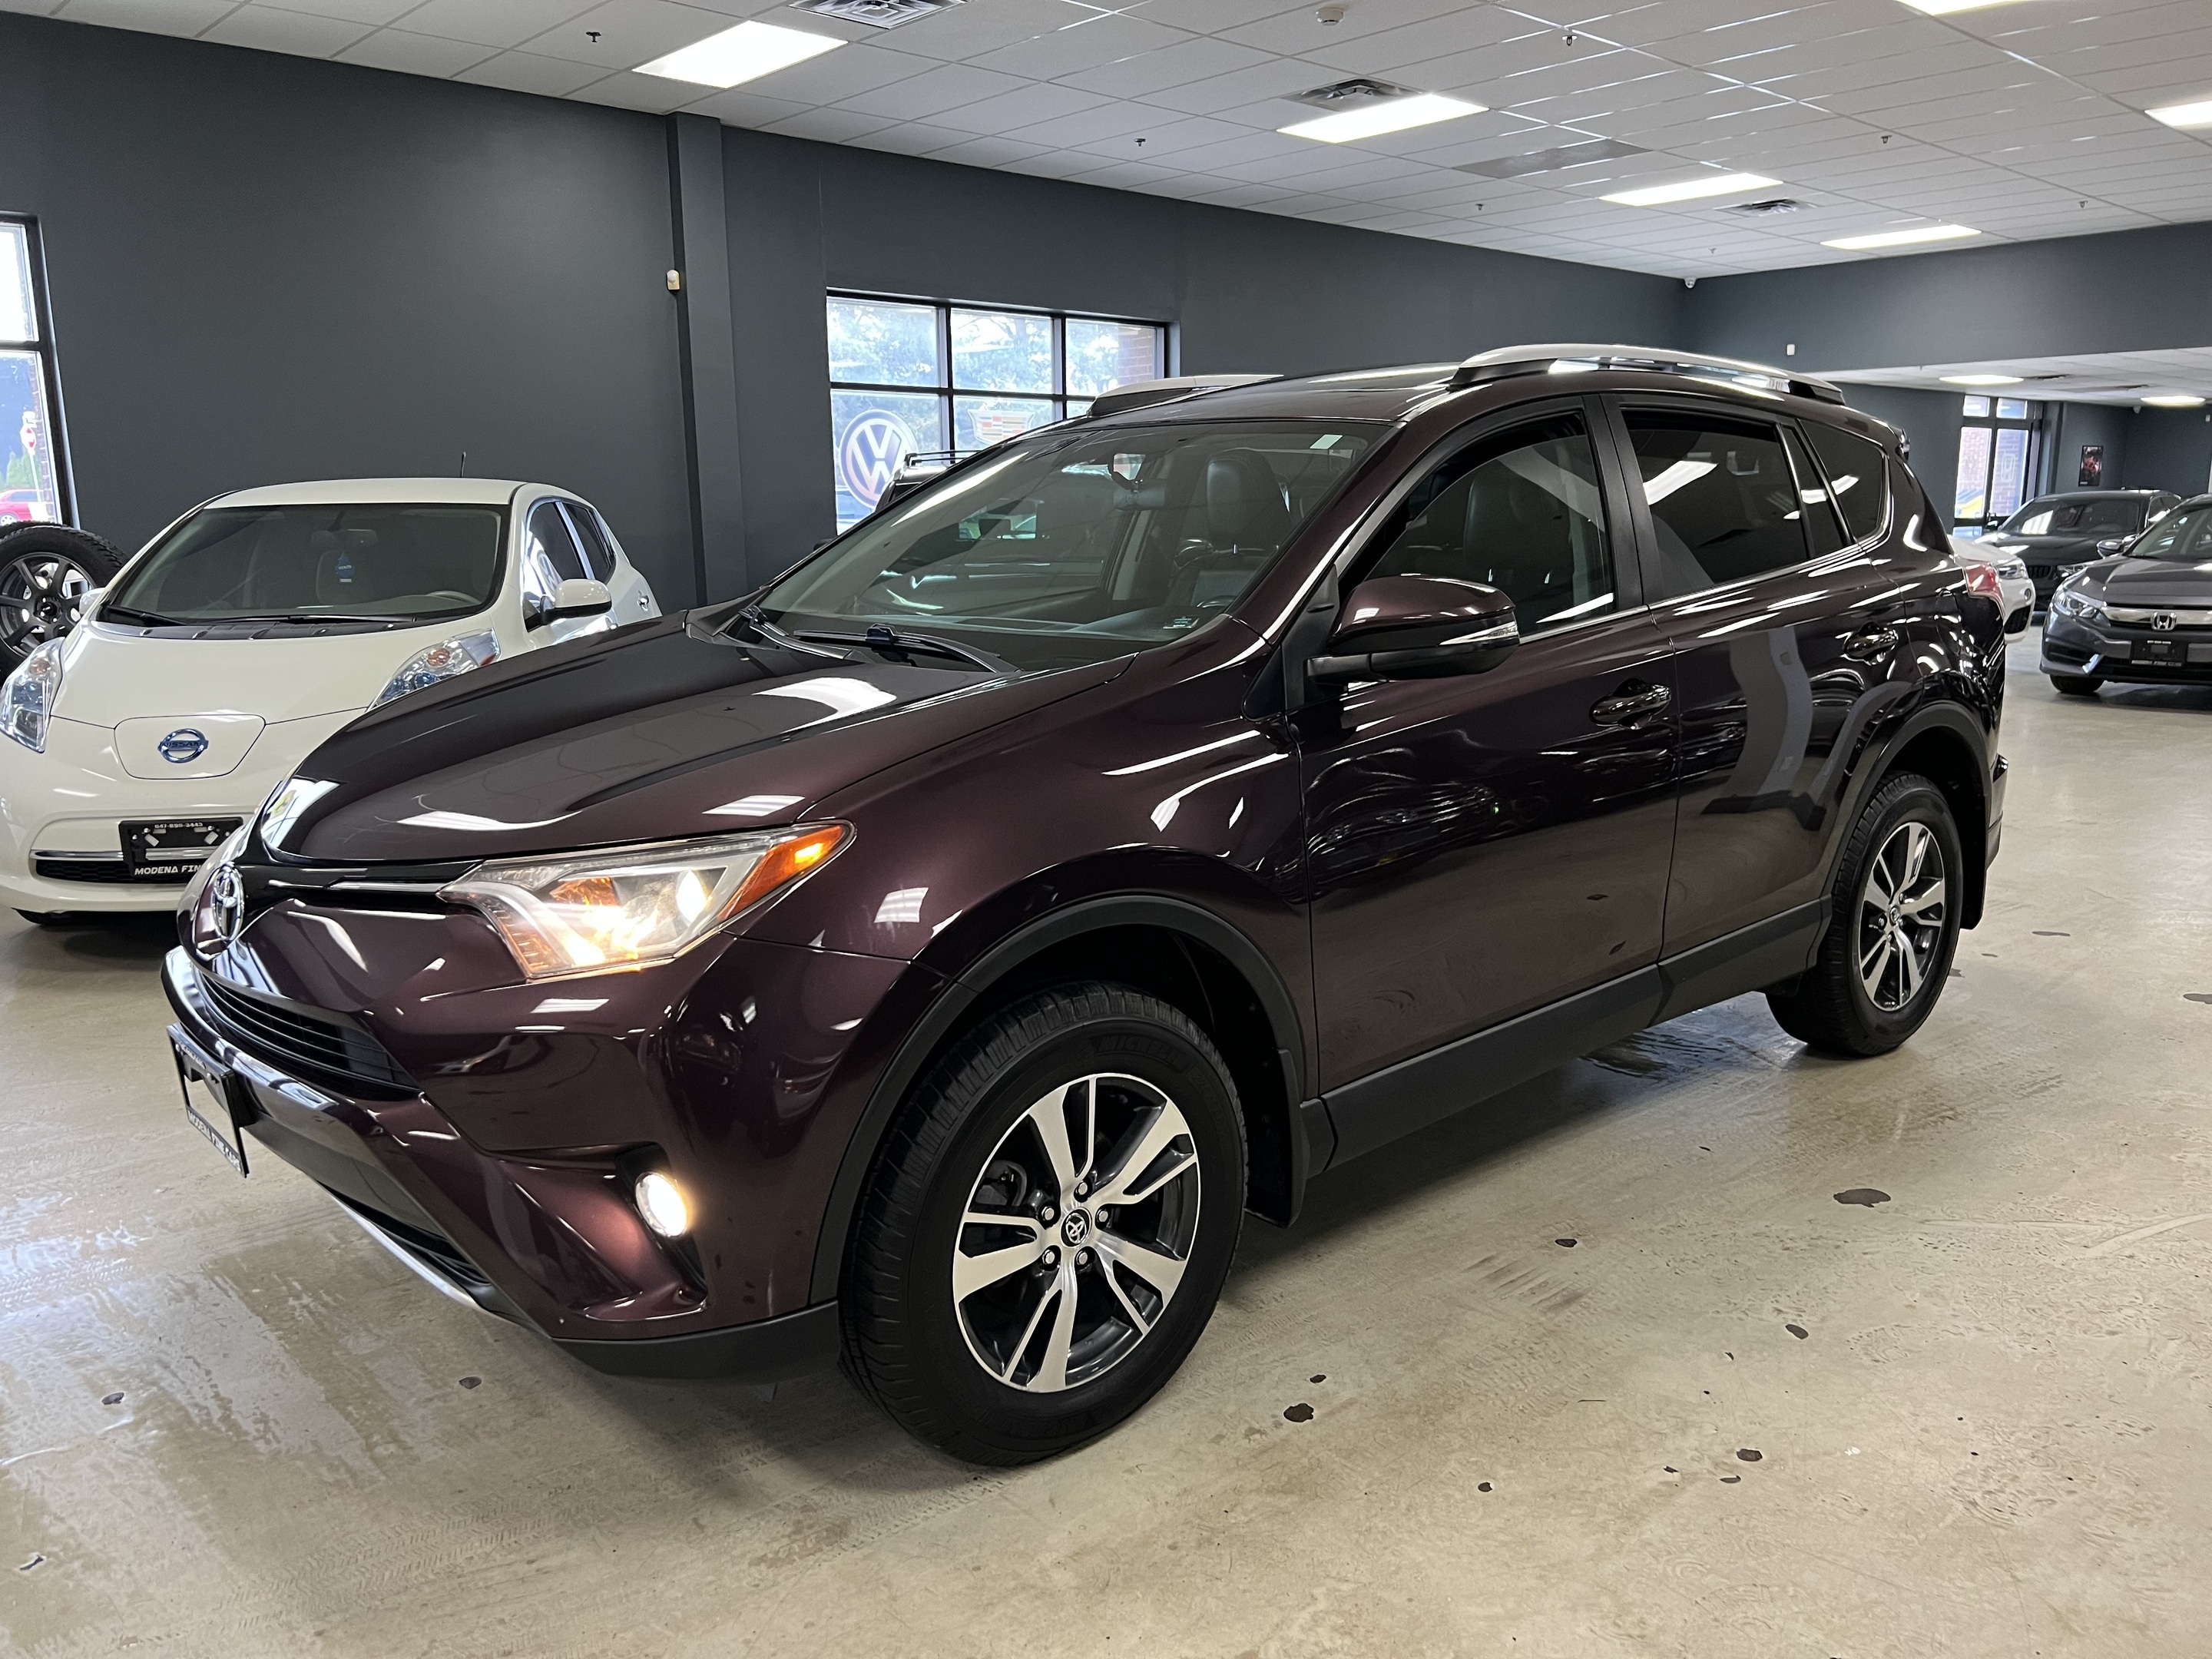 2016 Toyota RAV4 4dr XLE*LEATHER*BACK-UP CAMERA*NO ACCIDENTS*LOW KM